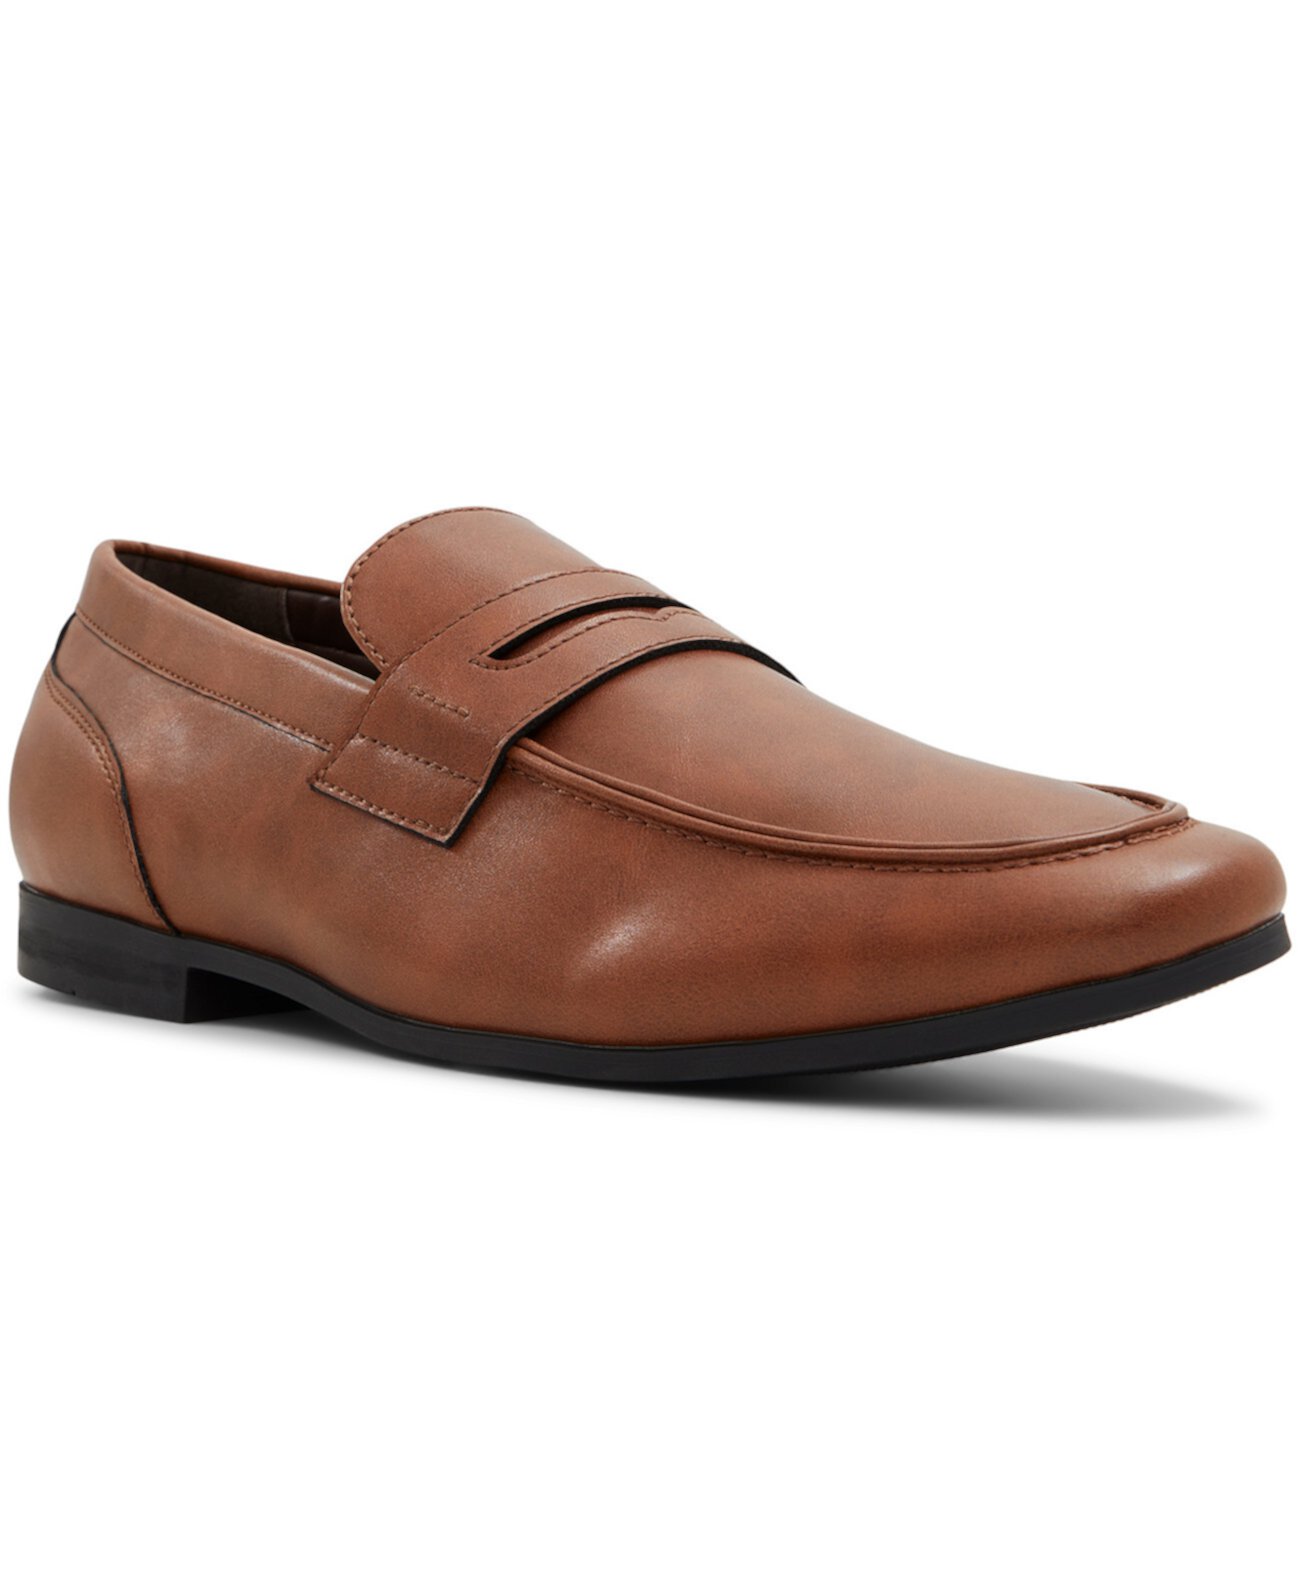 Men's Starling Driving Loafers Call It Spring